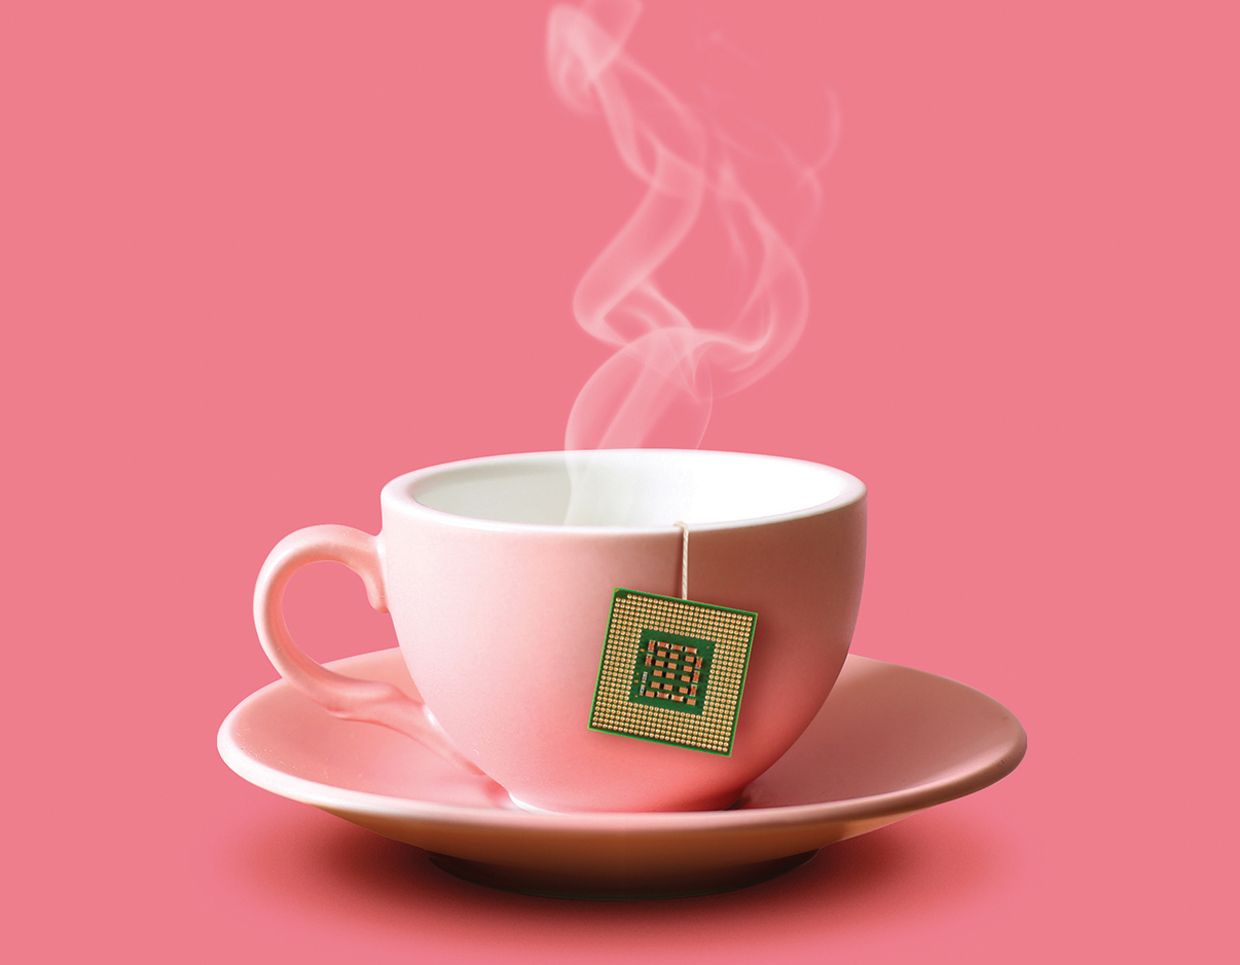 A cup of tea with a microchip at the end of the teabag string.